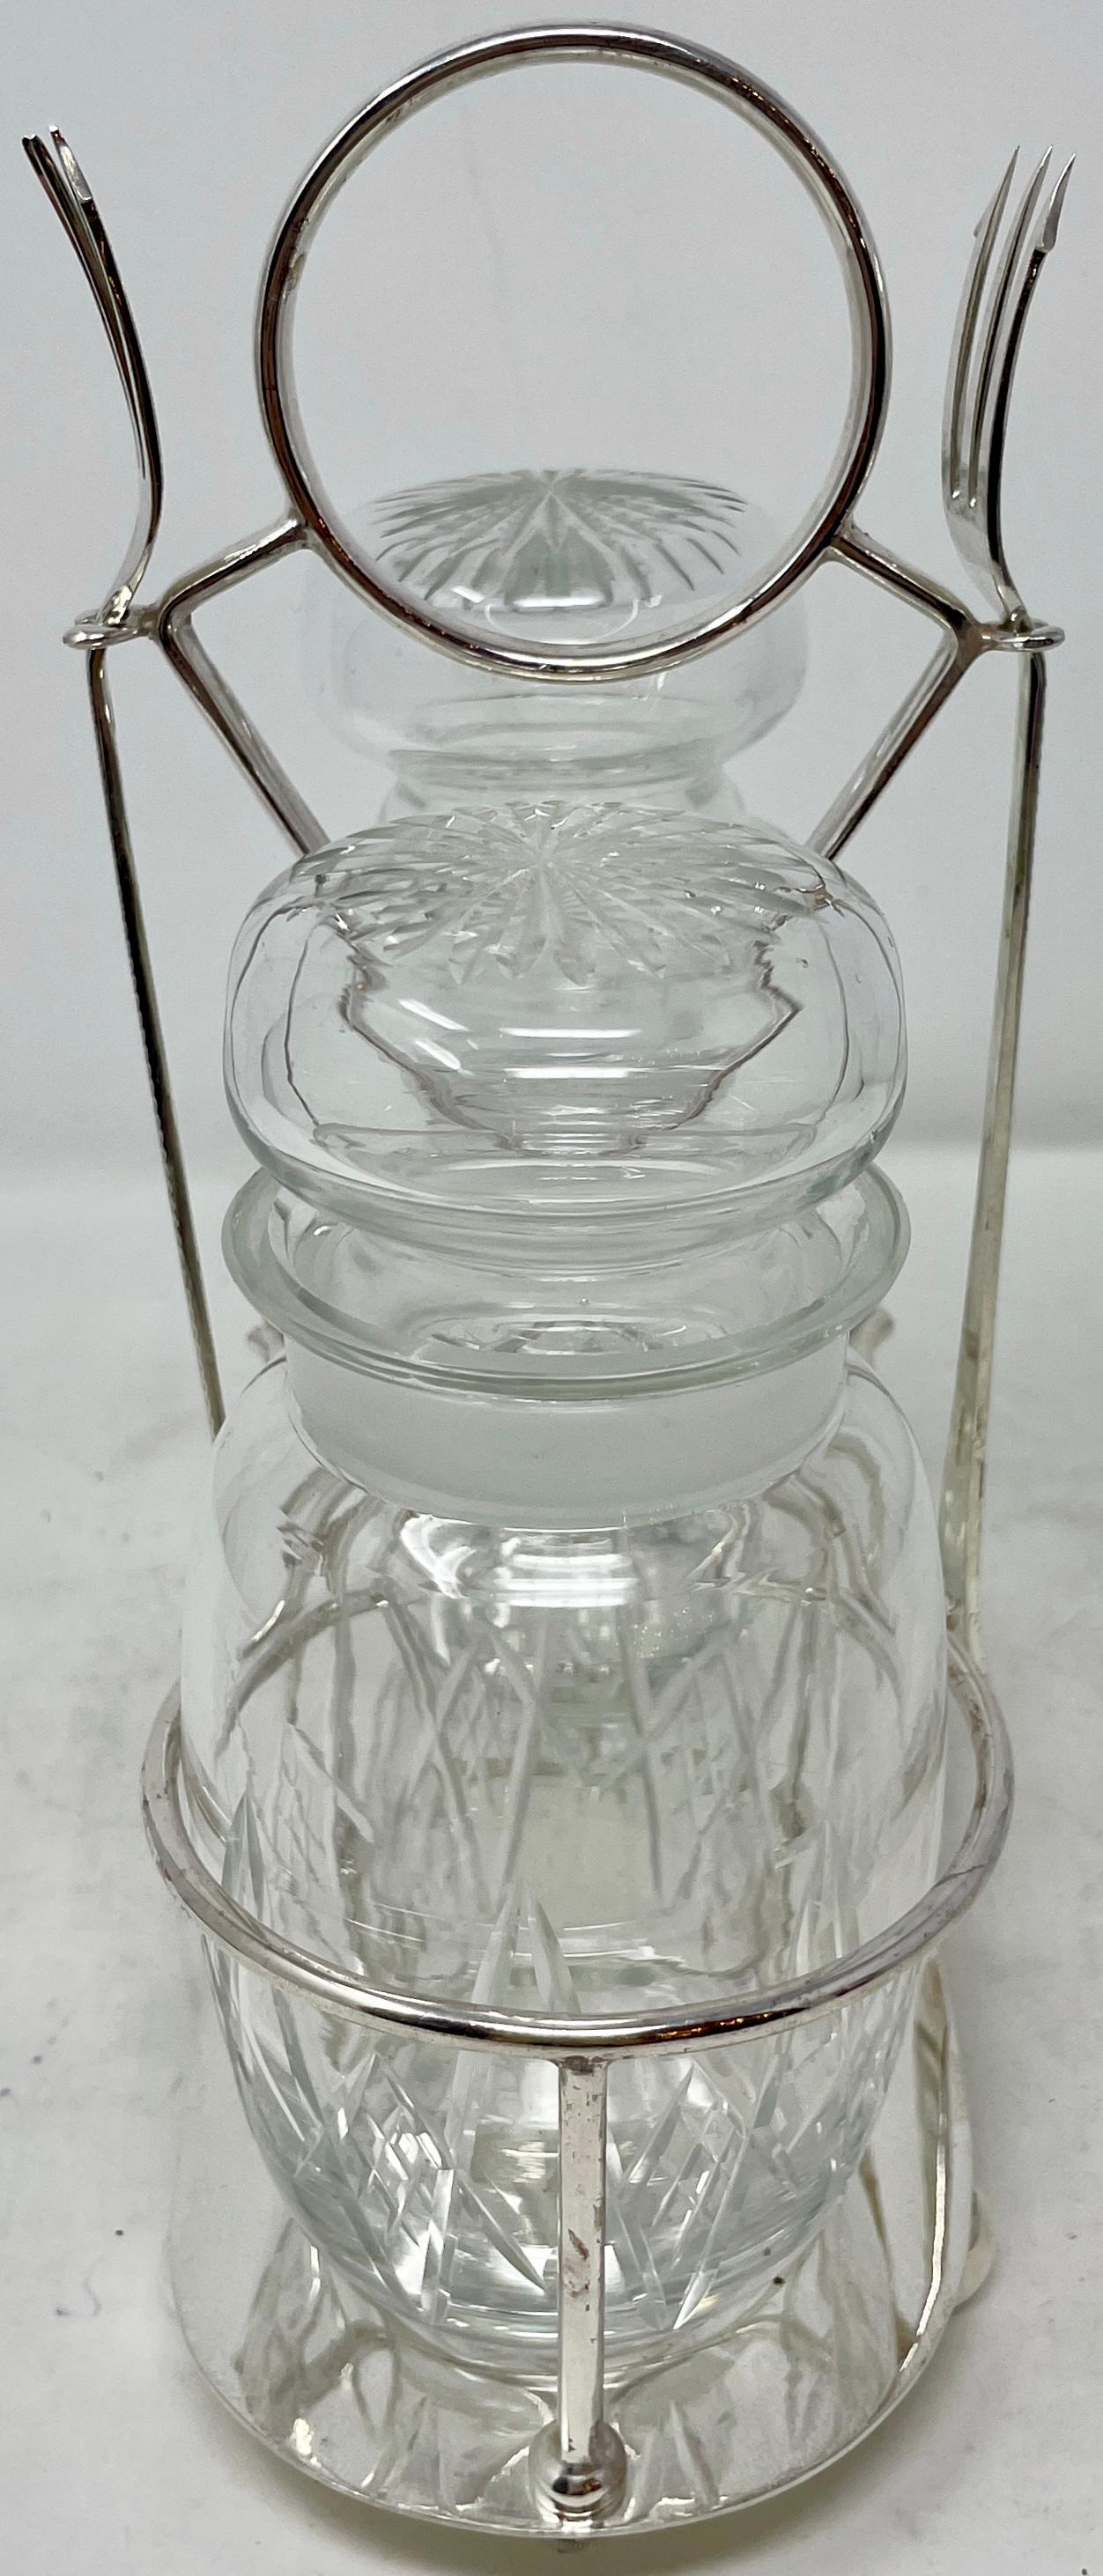 20th Century Antique English Crystal & Silver-Plate Double Jar Pickle Castor & Forks Ca 1900